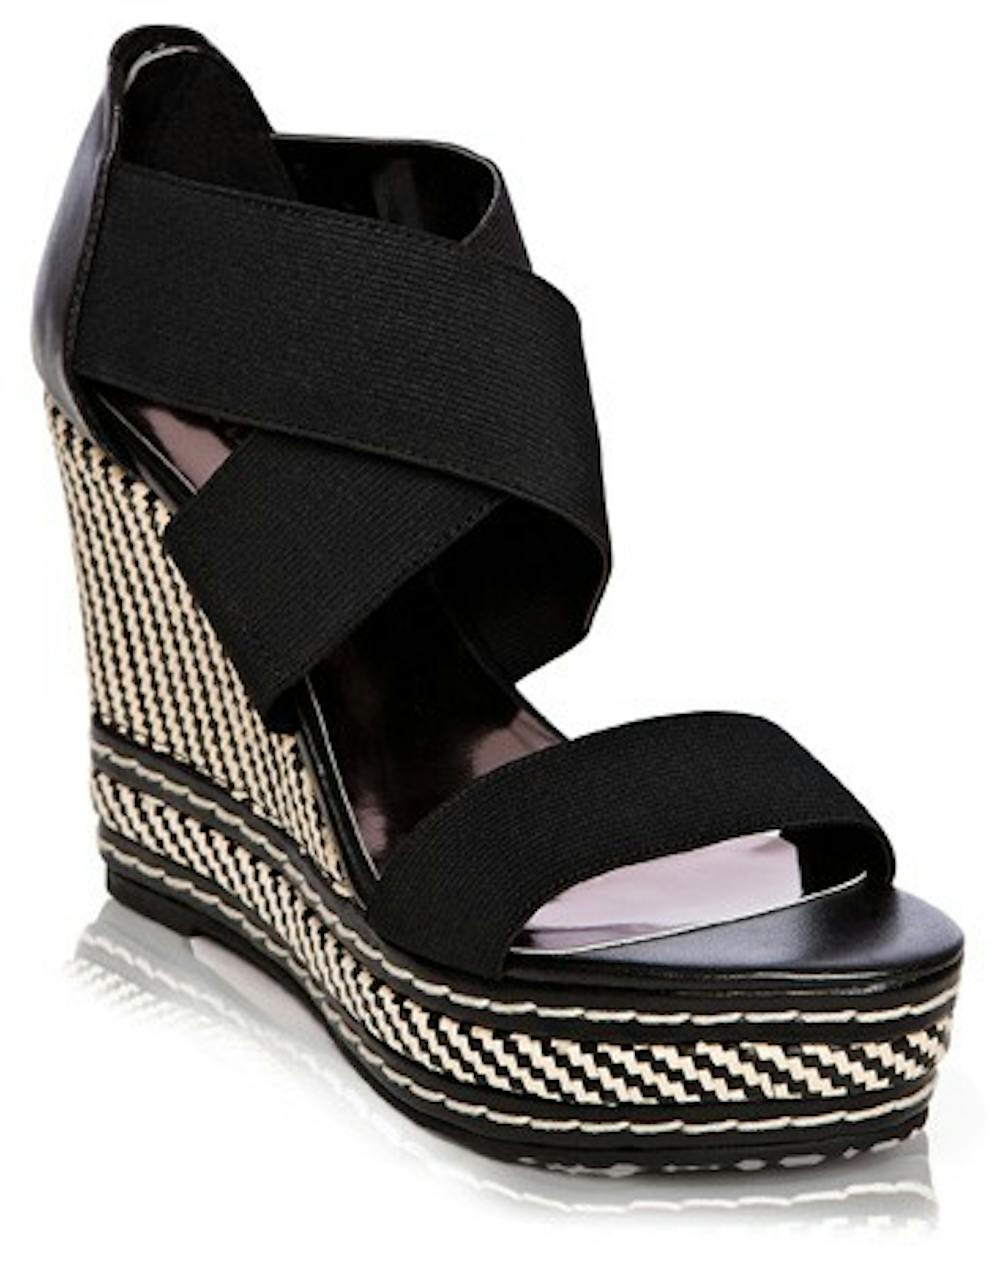 The newest wedges have a print on the body of the shoe rather than the straps. Photo from nordstrom.com.